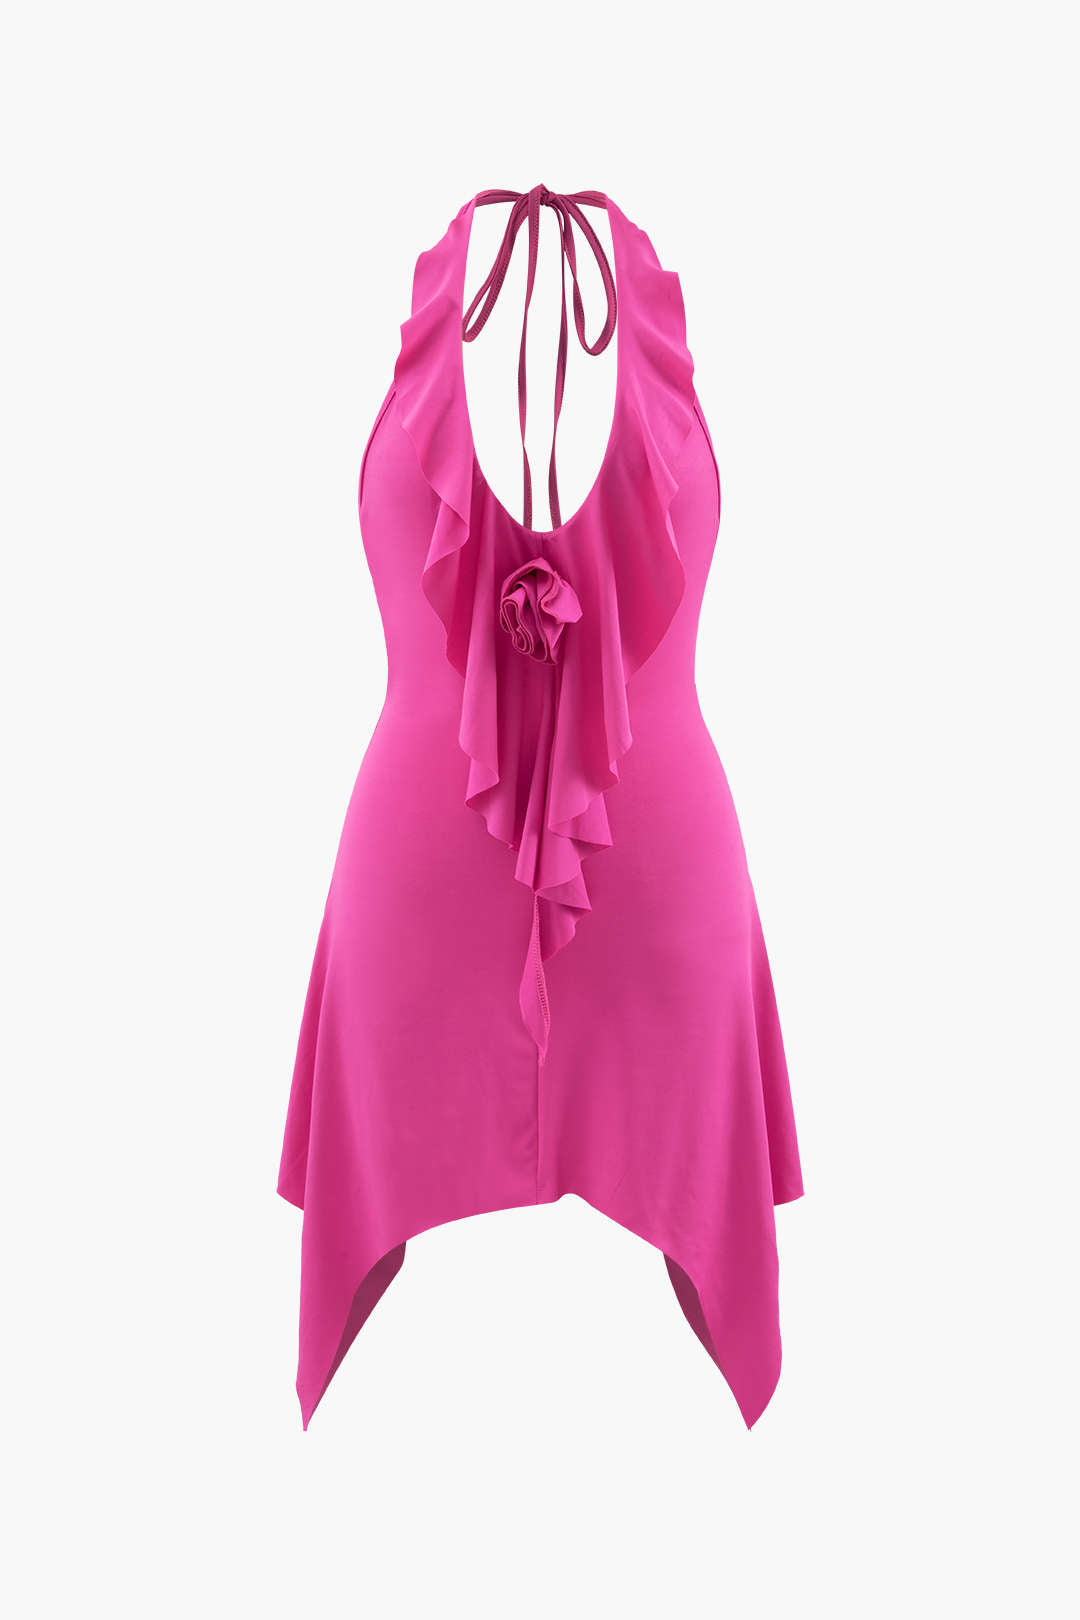 PRIVATE LIFE PINK RUFFLE HALTERNECK DRESS